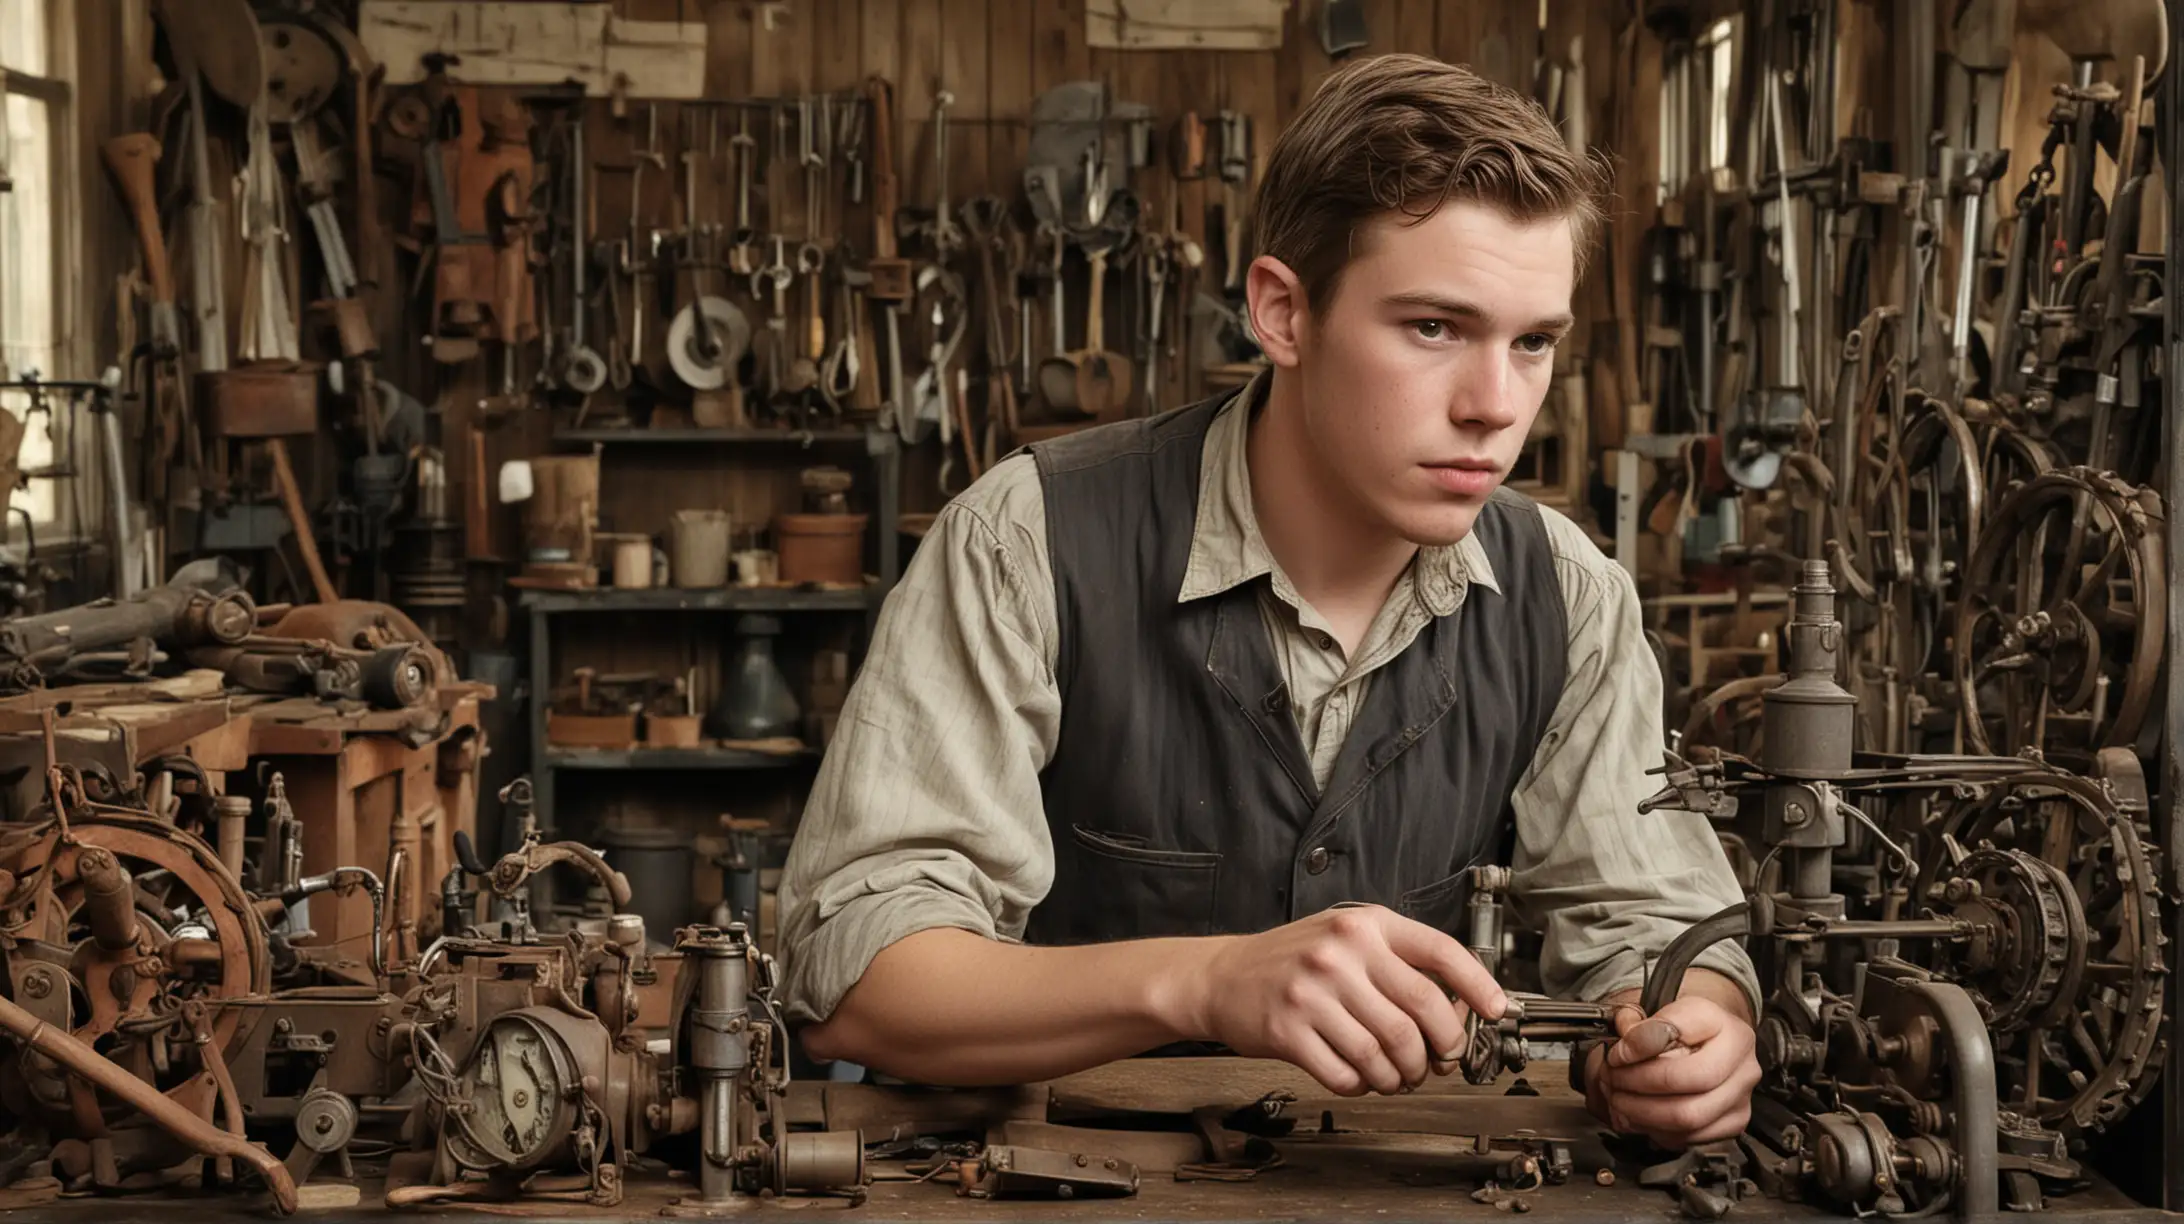 Prompt: From Farm to Factory:  Born in 1863 on a Michigan farm, young Henry possessed a natural curiosity for mechanics. He tinkered with watches and farm implements, yearning for a life beyond the backbreaking labor of the fields. At 16, he apprenticed in a machine shop, his thirst for knowledge growing with every gear he turned. Ford's early years instilled a work ethic that would later define his factories, but also a disdain for the drudgery of manual labor, a feeling that would fuel his future innovations.
Background: Farm